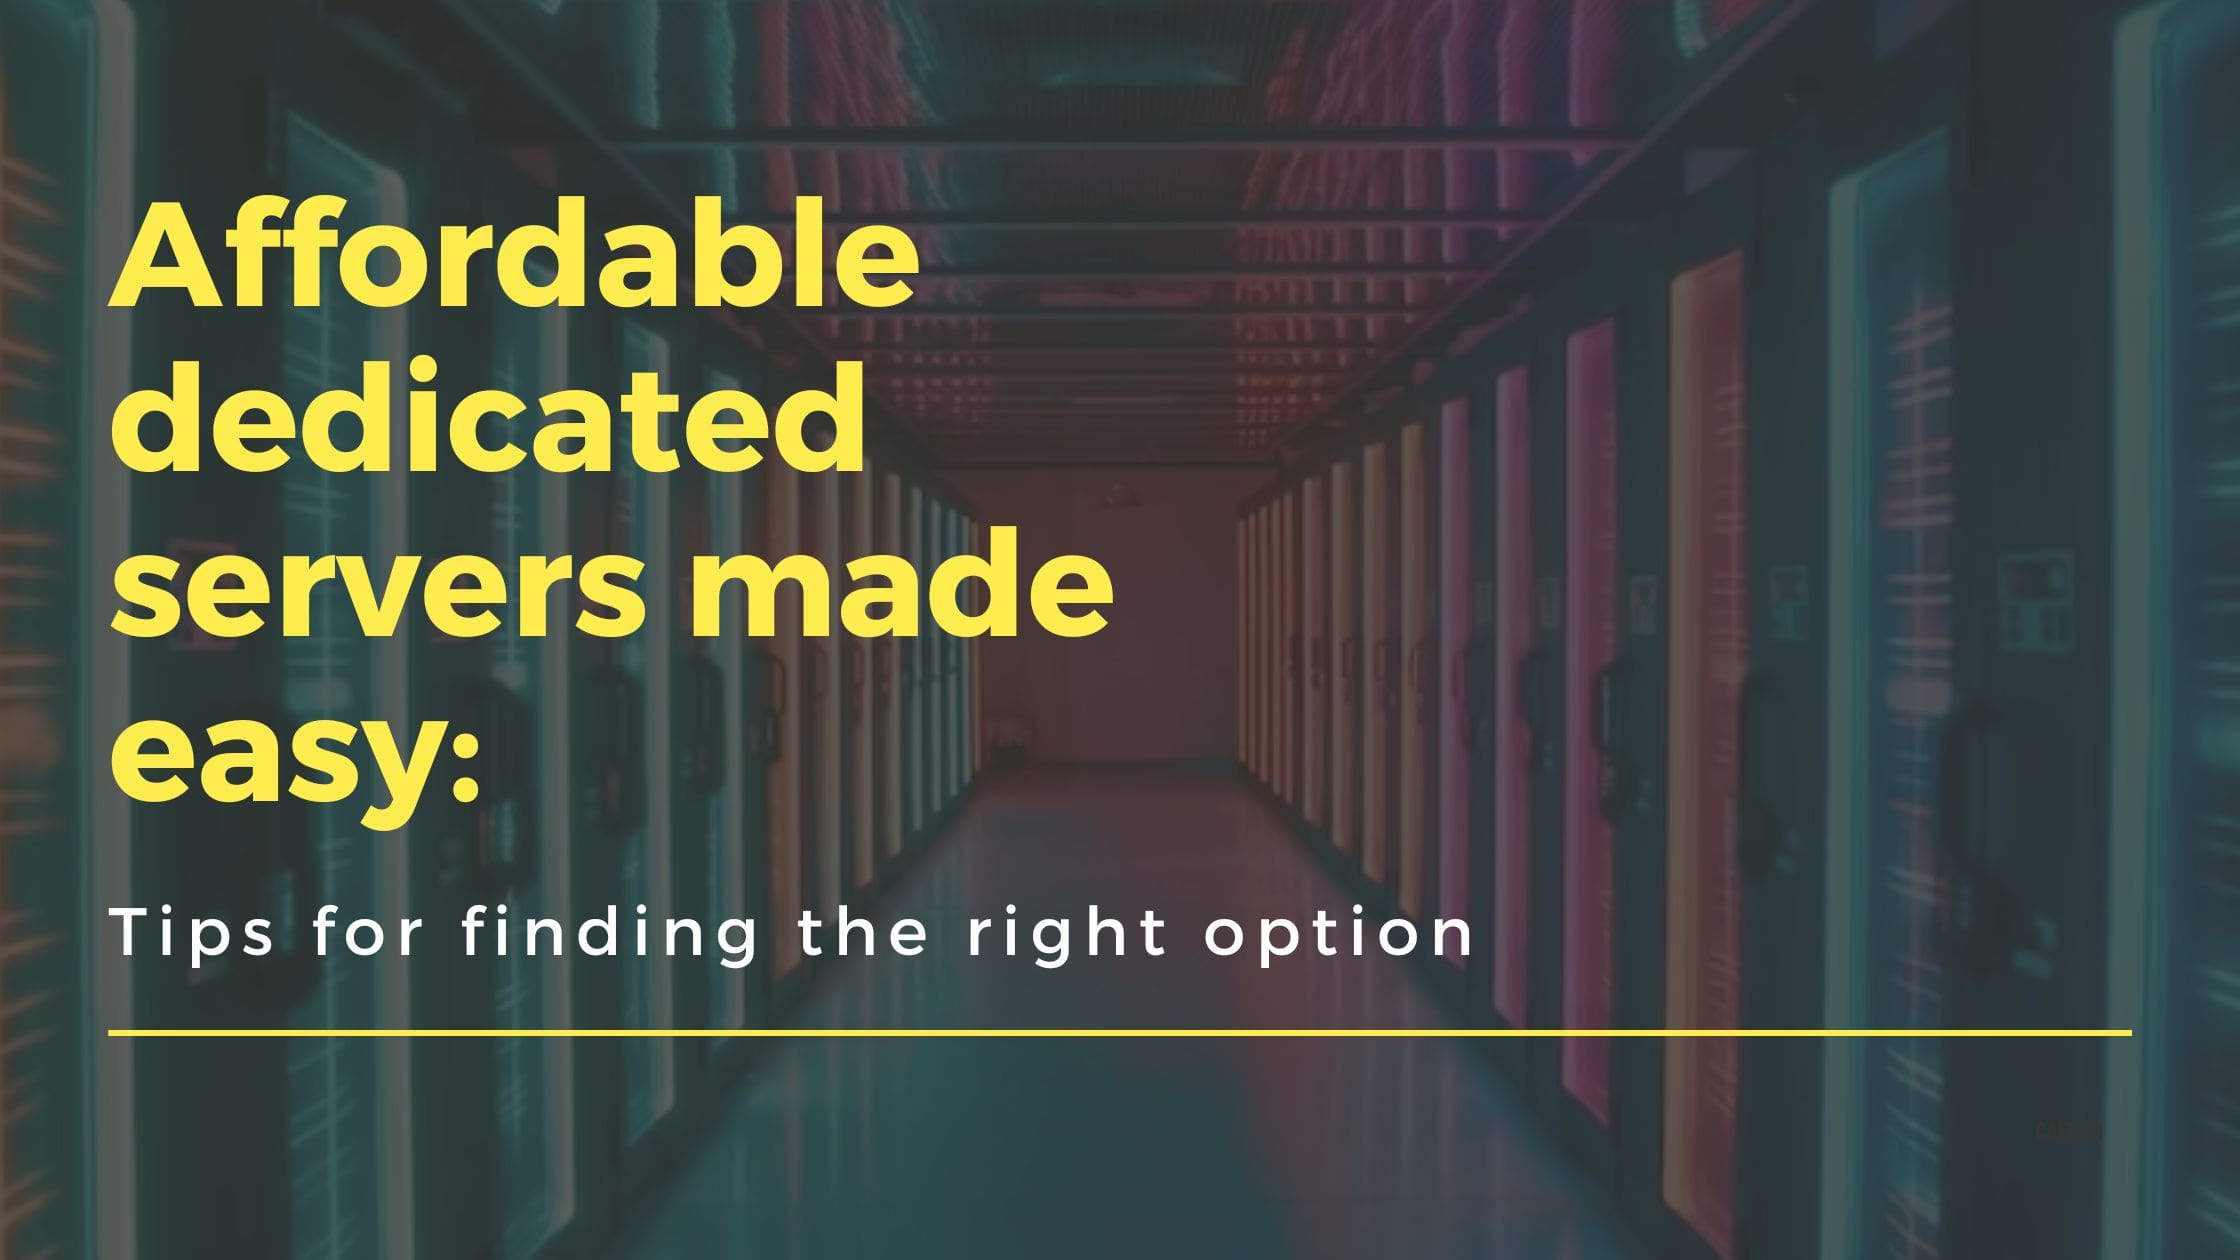 Affordable dedicated servers made easy Tips for finding the right option